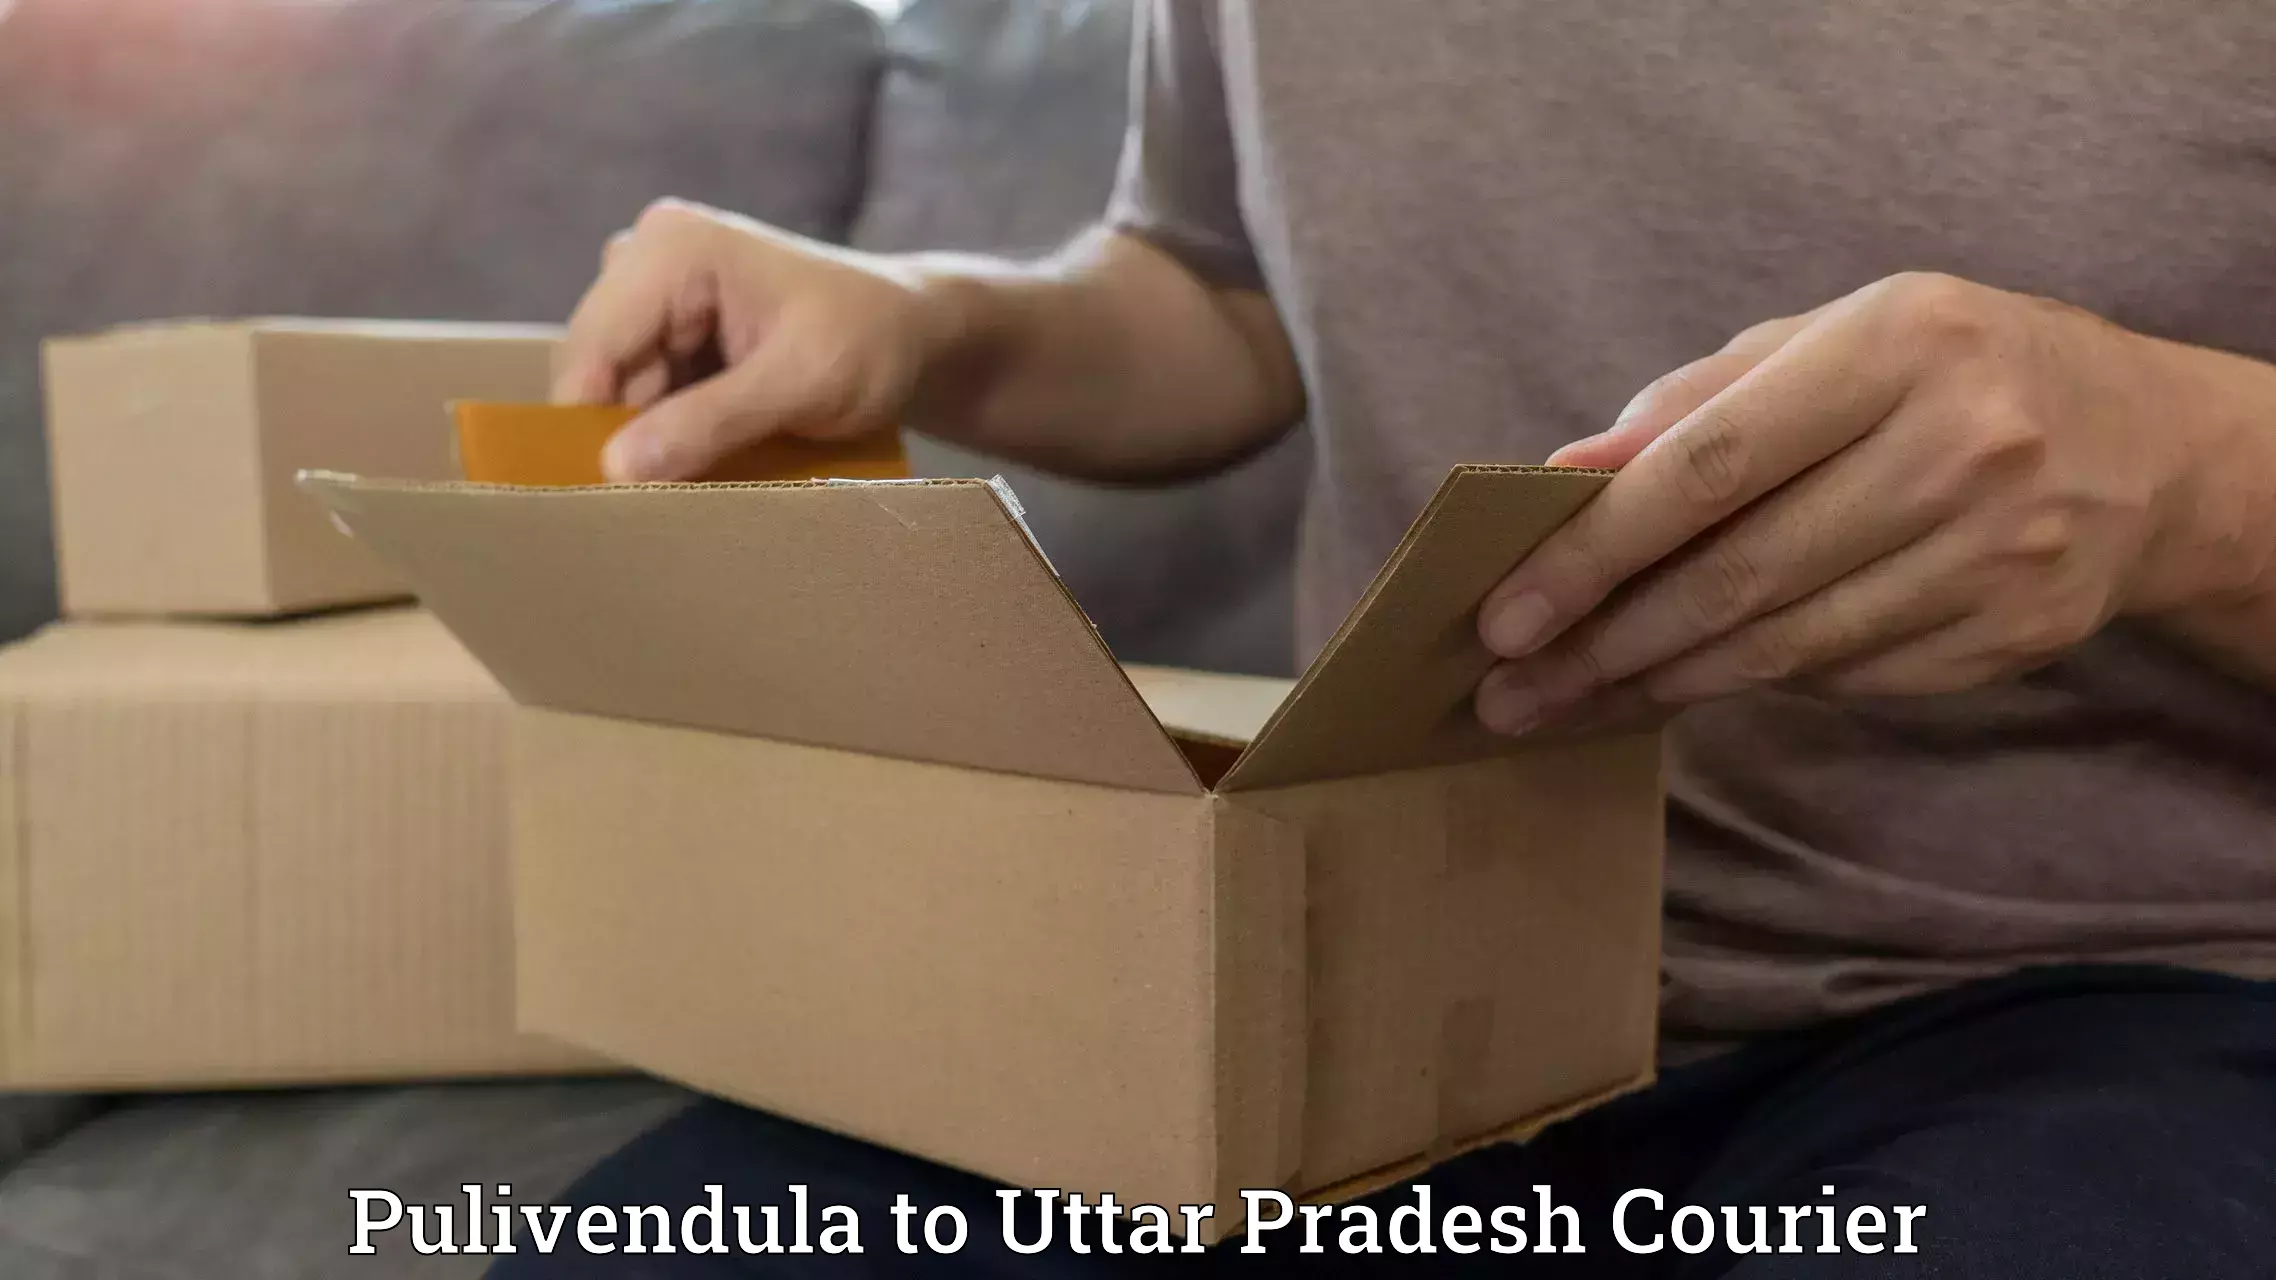 24-hour delivery options Pulivendula to Aligarh Muslim University